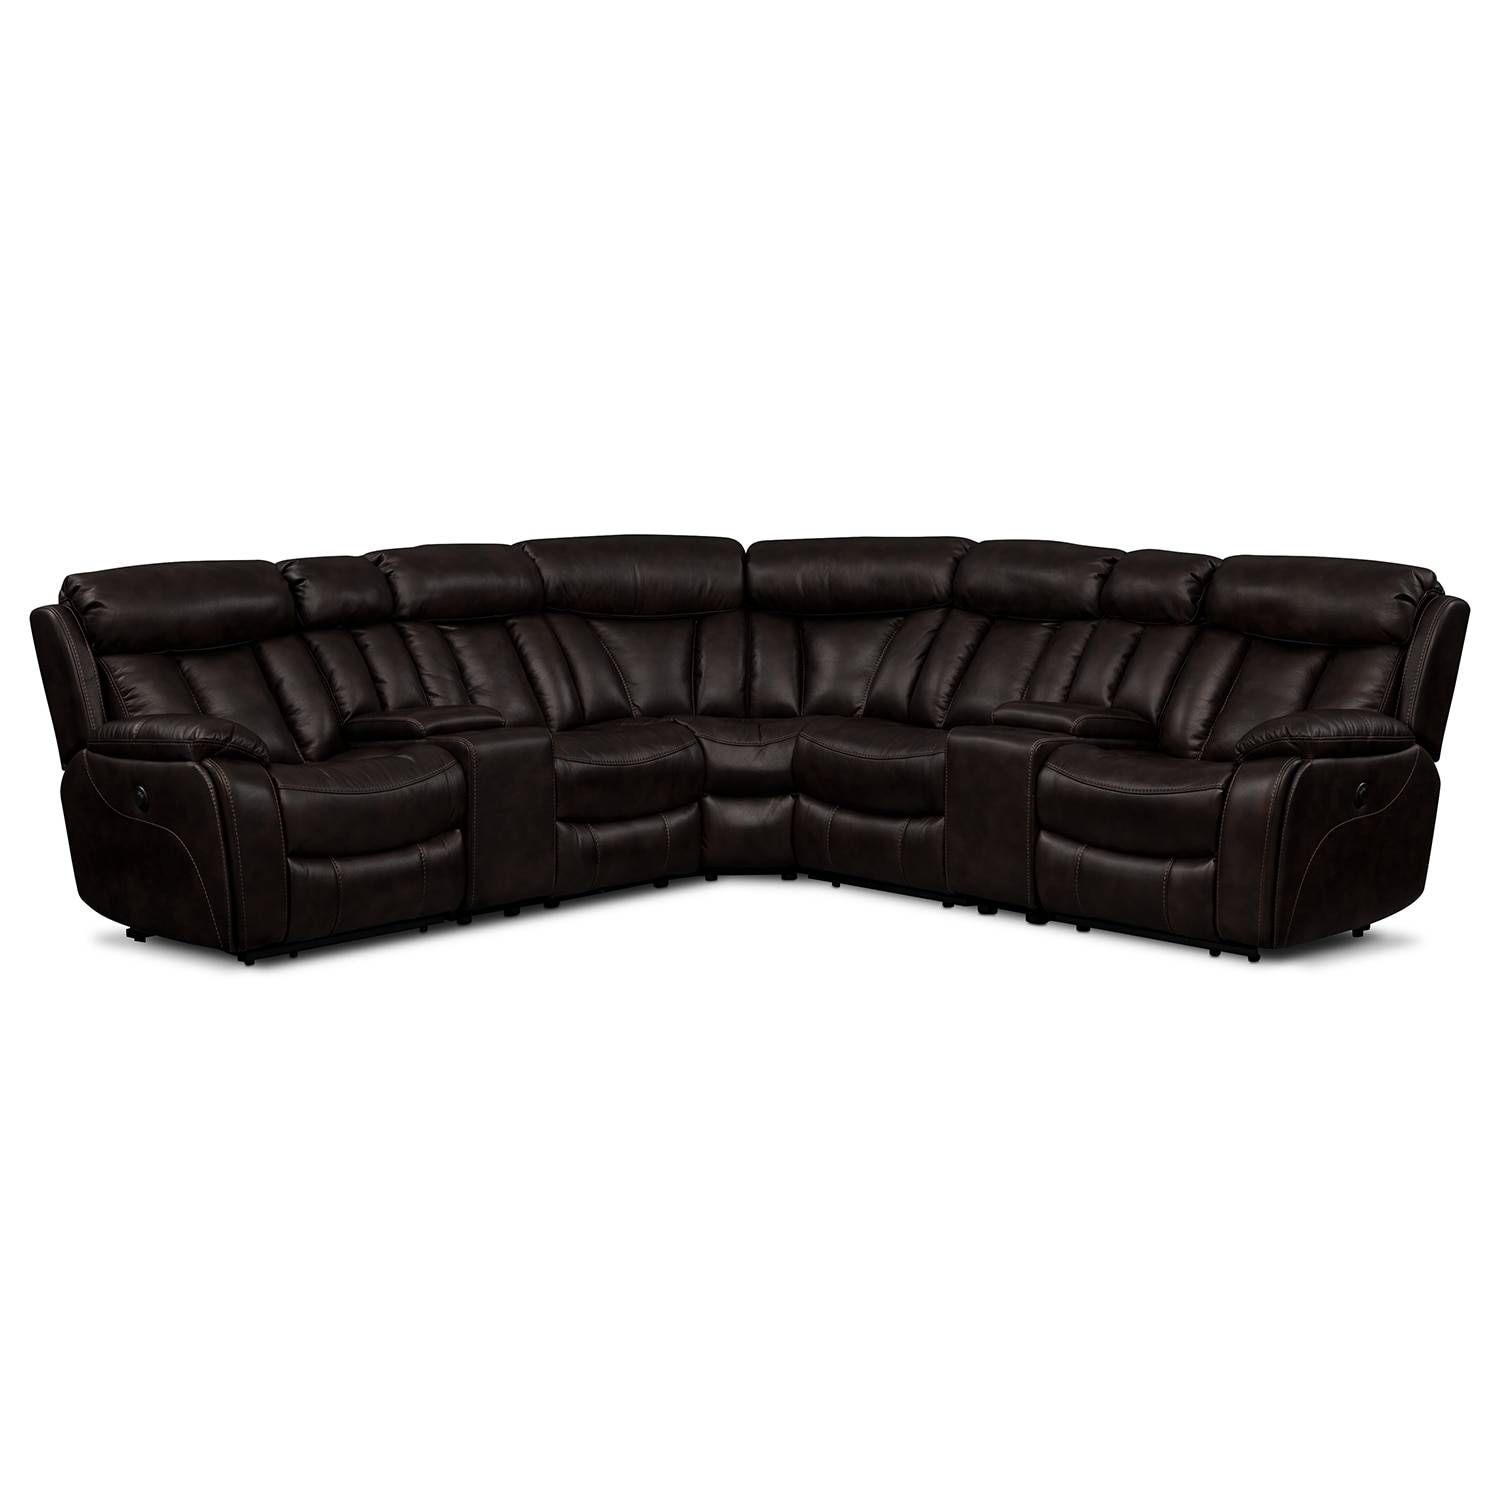 Sectional Sofas | Value City Furniture | Value City Furniture For Long Sectional Sofa With Chaise (View 23 of 30)